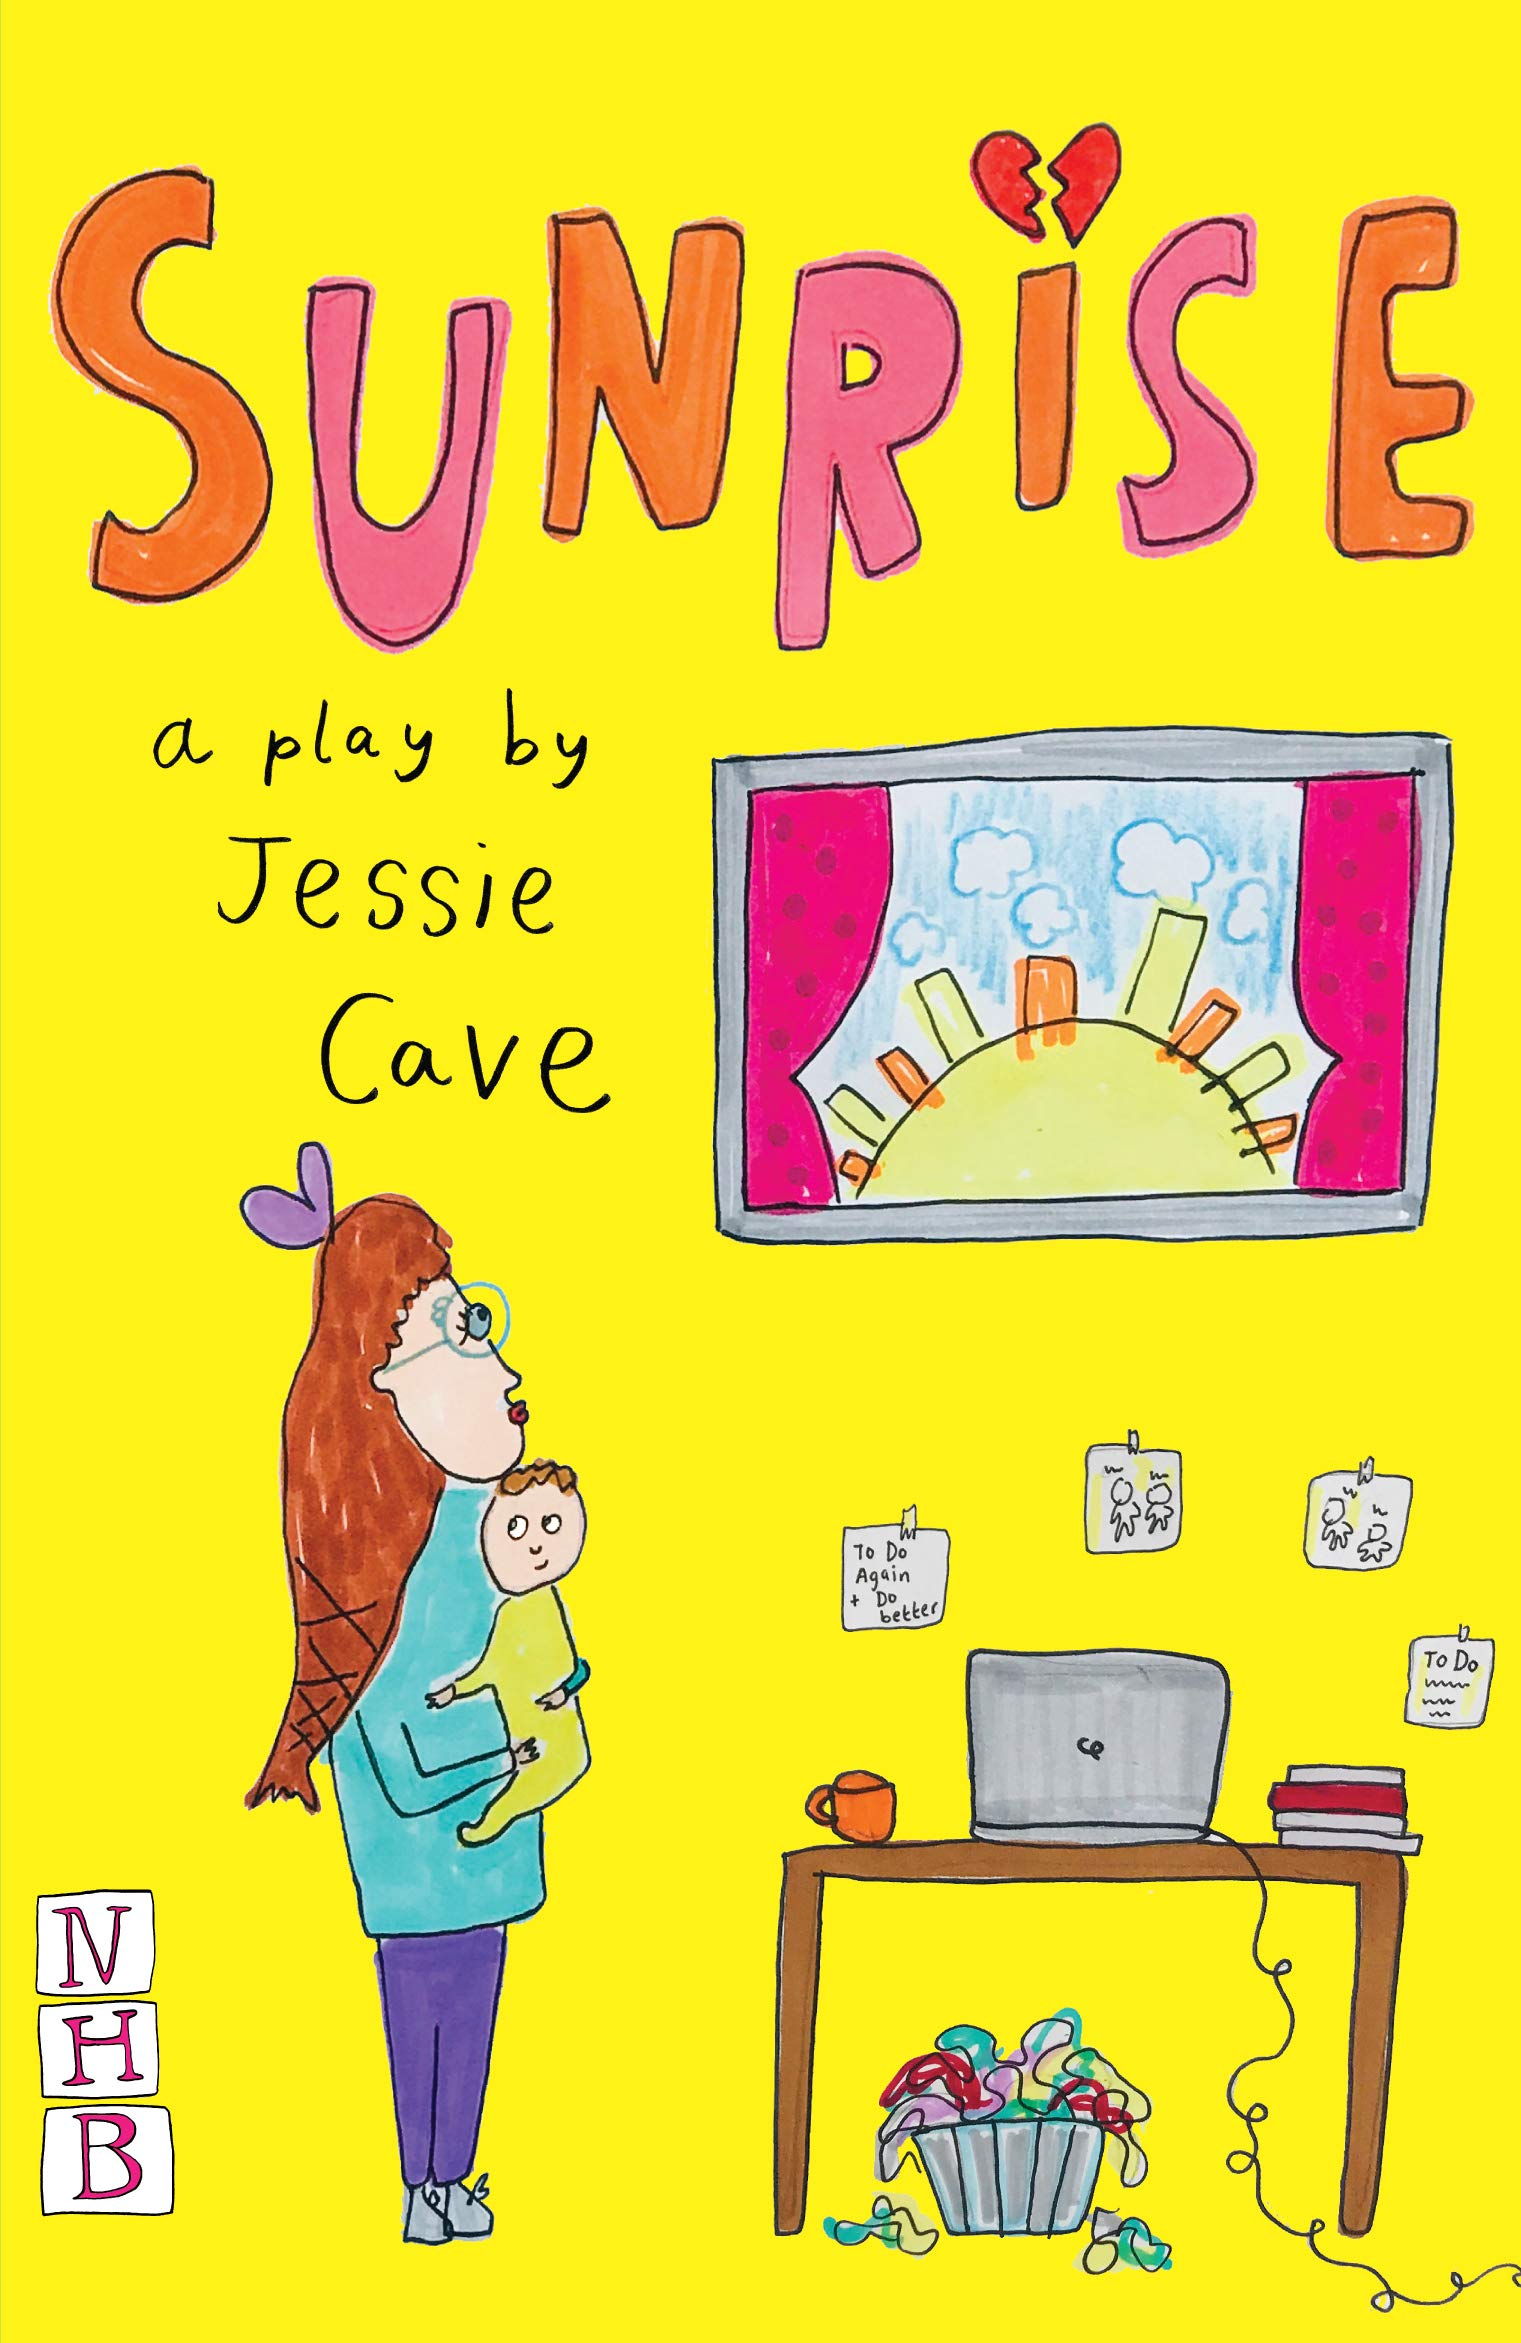 Book cover for “Sunrise”, a play by Jessie Cave